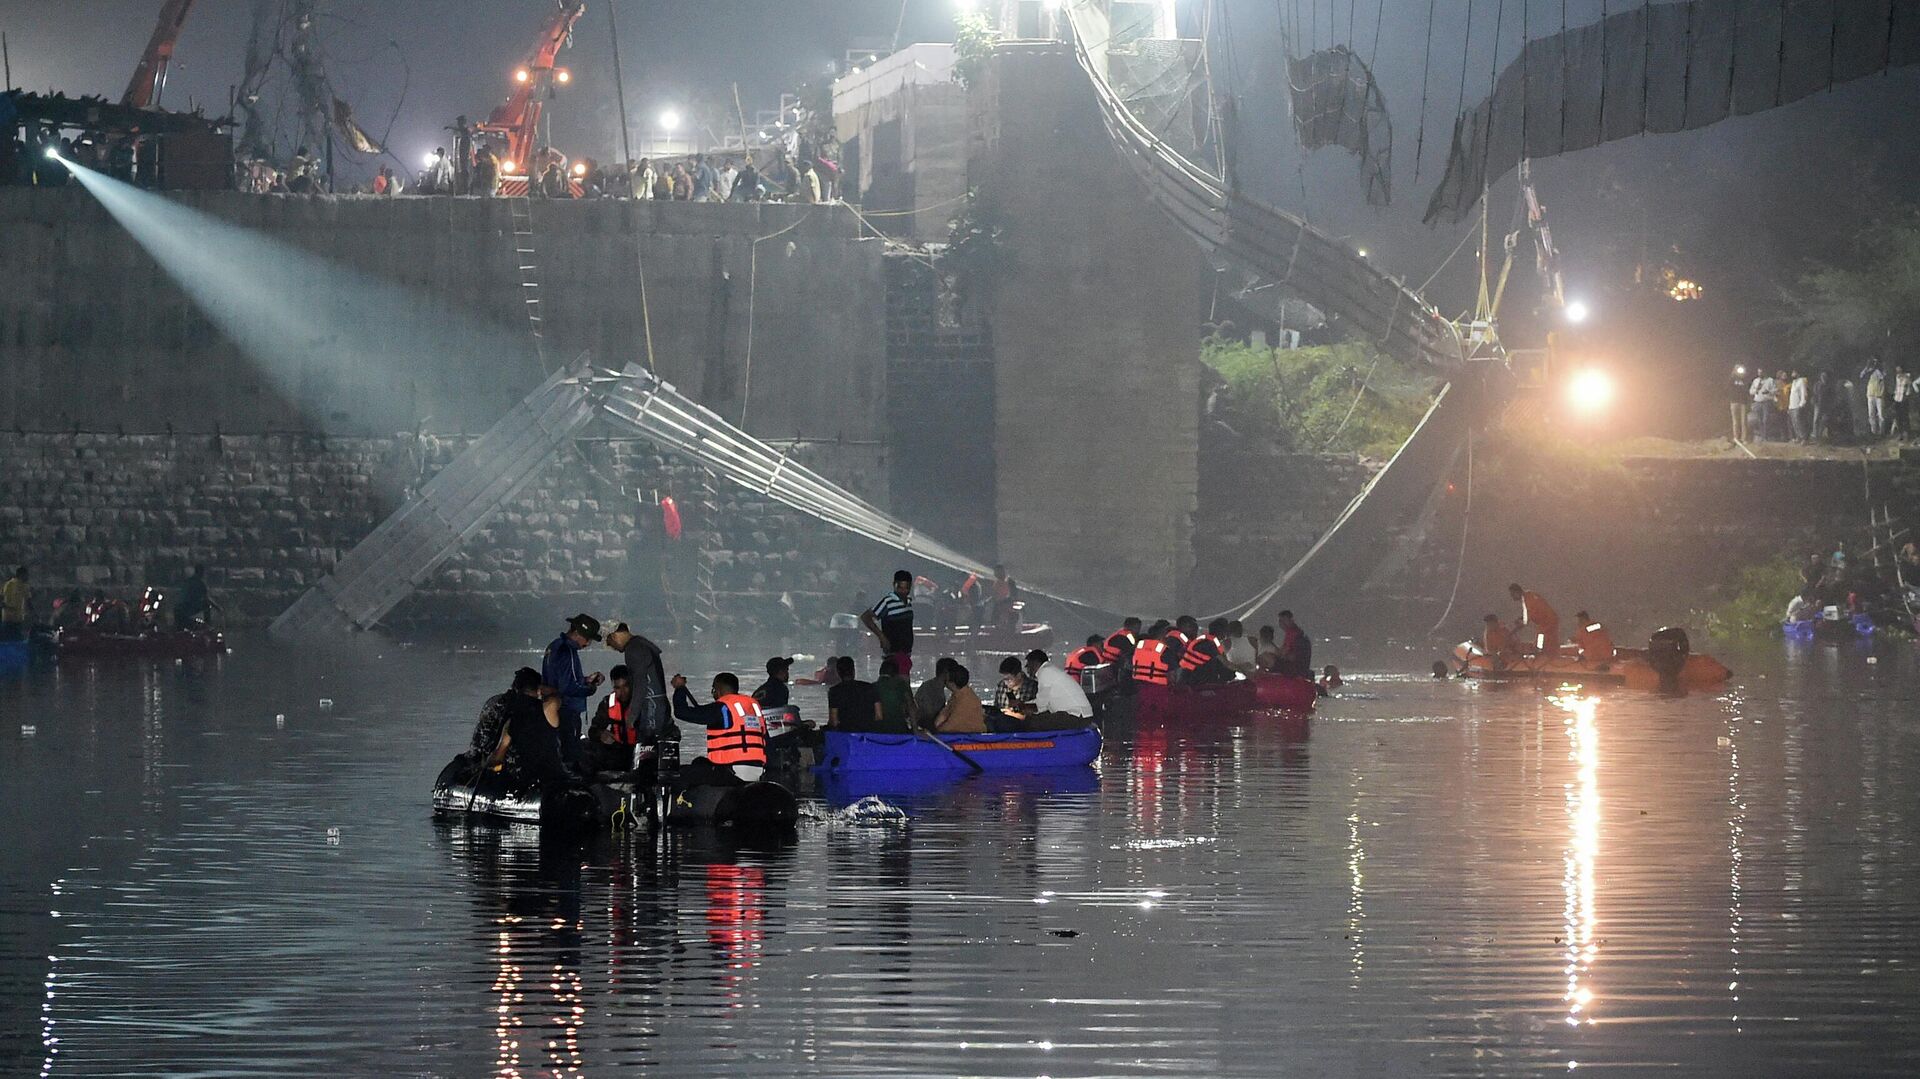 Indian rescue personnel conduct search operations after a bridge across the river Machchhu collapsed in Morbi, some 220 kms from Ahmedabad, early on October 31, 2022 - Sputnik International, 1920, 31.10.2022